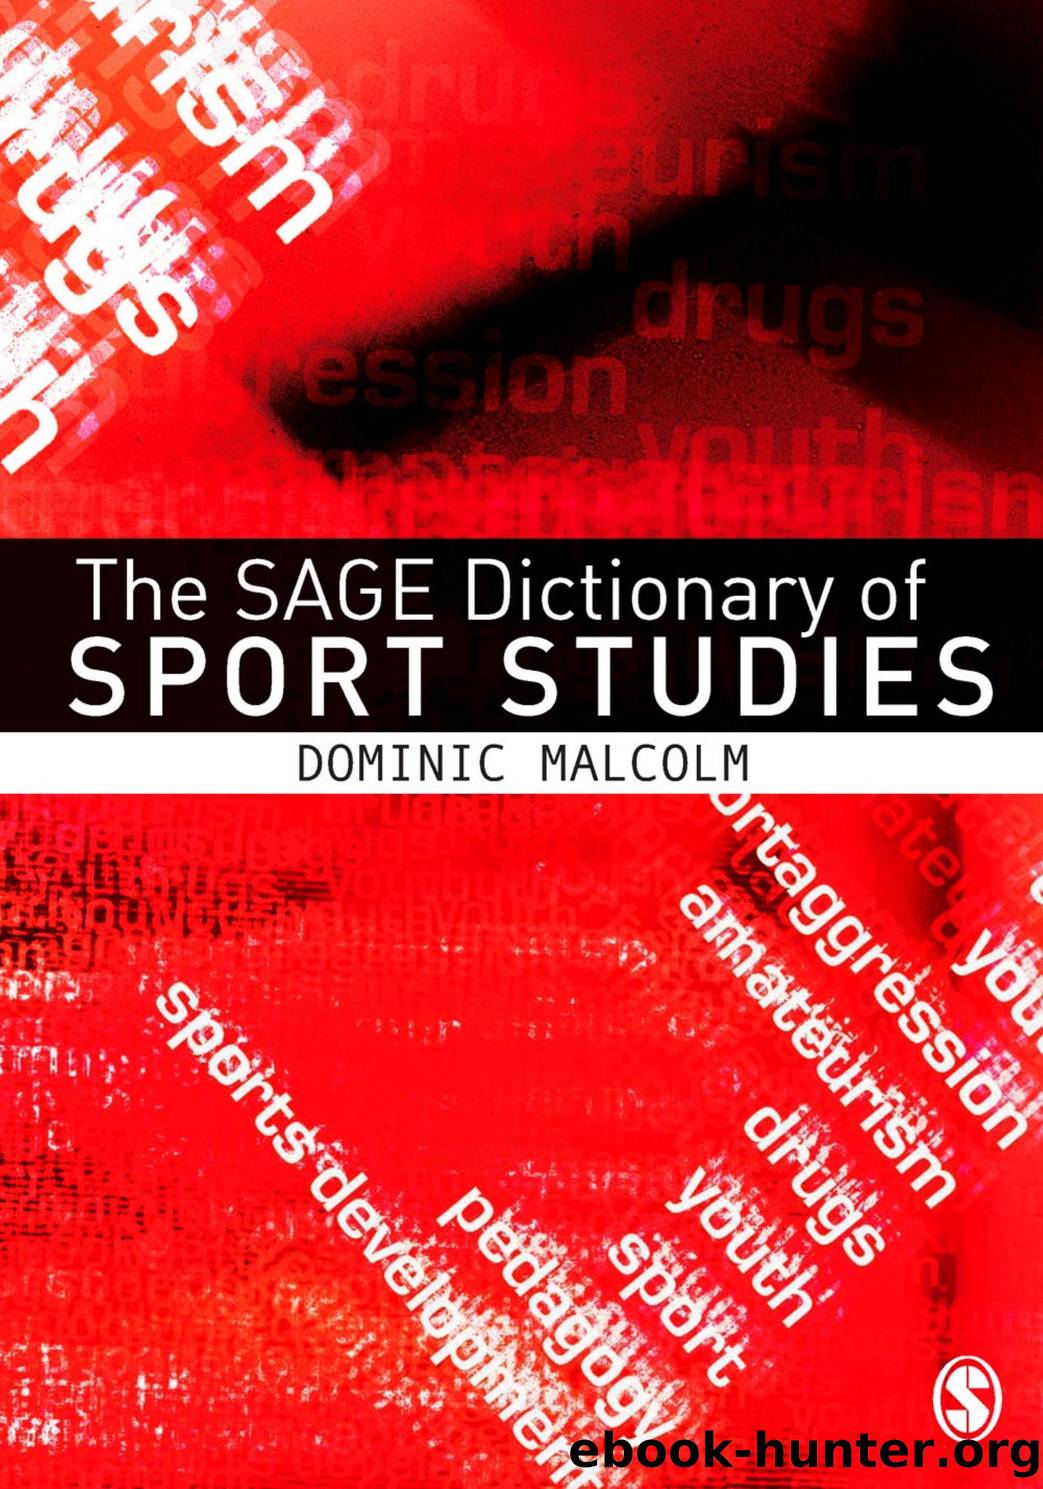 Malcolm by The SAGE dictionary of sports studies-SAGE (2008)